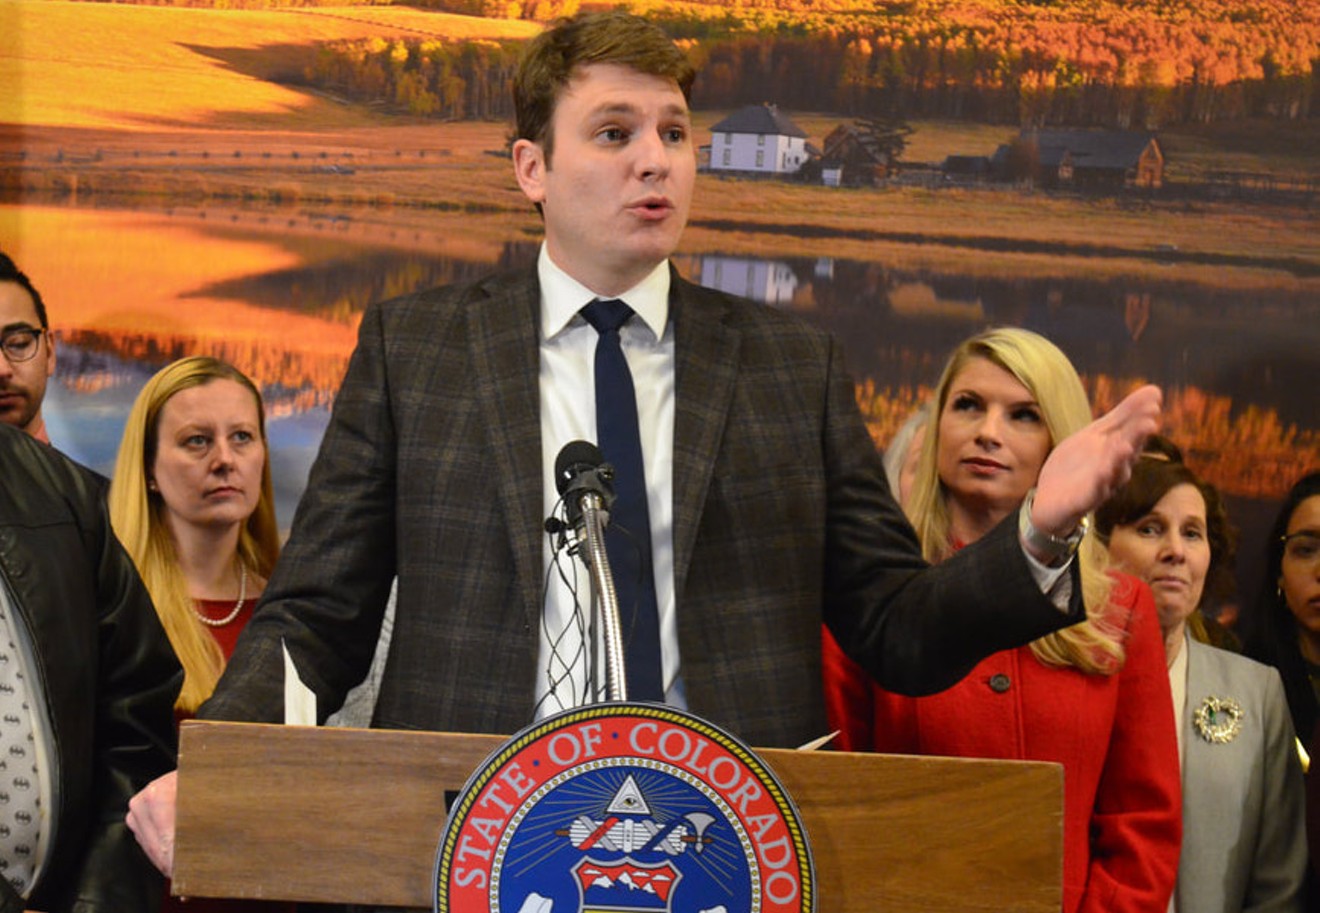 Colorado Speaker of the House Alec Garnett pushed through House Bill 1317 earlier this year, adding new restrictions to medical marijuana and retail marijuana concentrates.